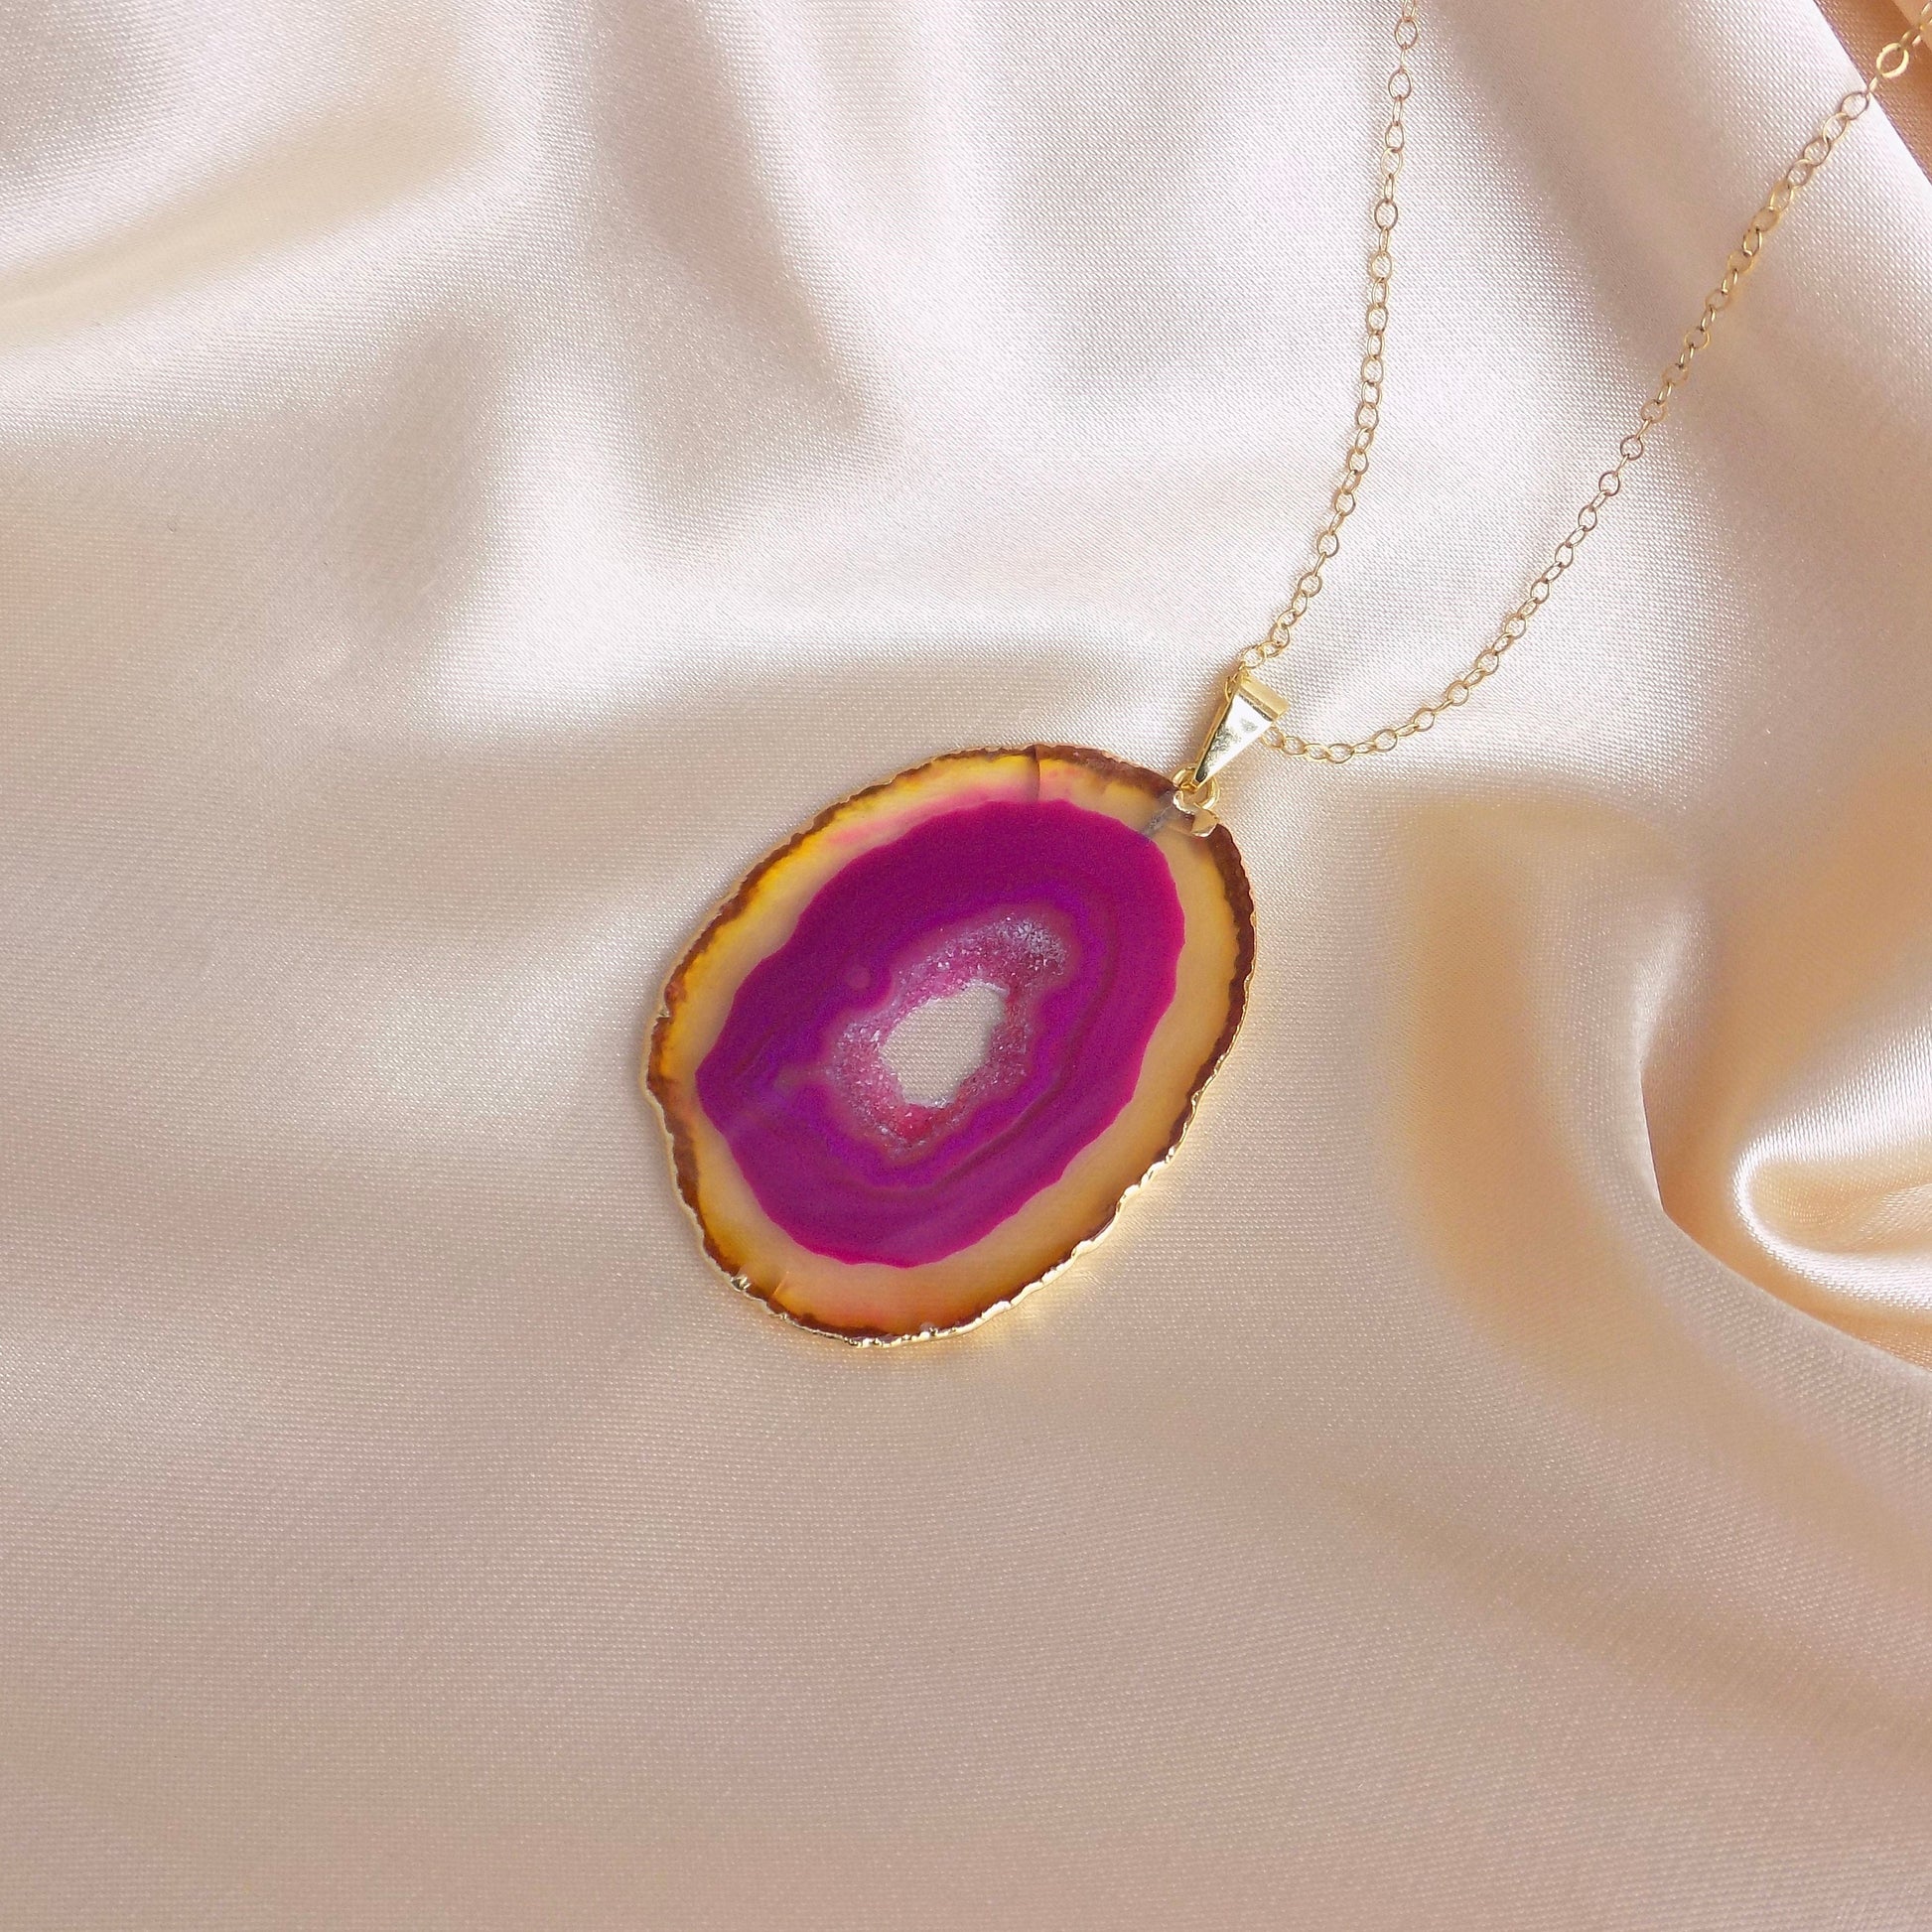 Custom Gift For Best Friend, Pink Druzy Necklace Gold Fill Chain, Personalized Geode Necklace Agate Pendant, Long Boho Slice, G14-831